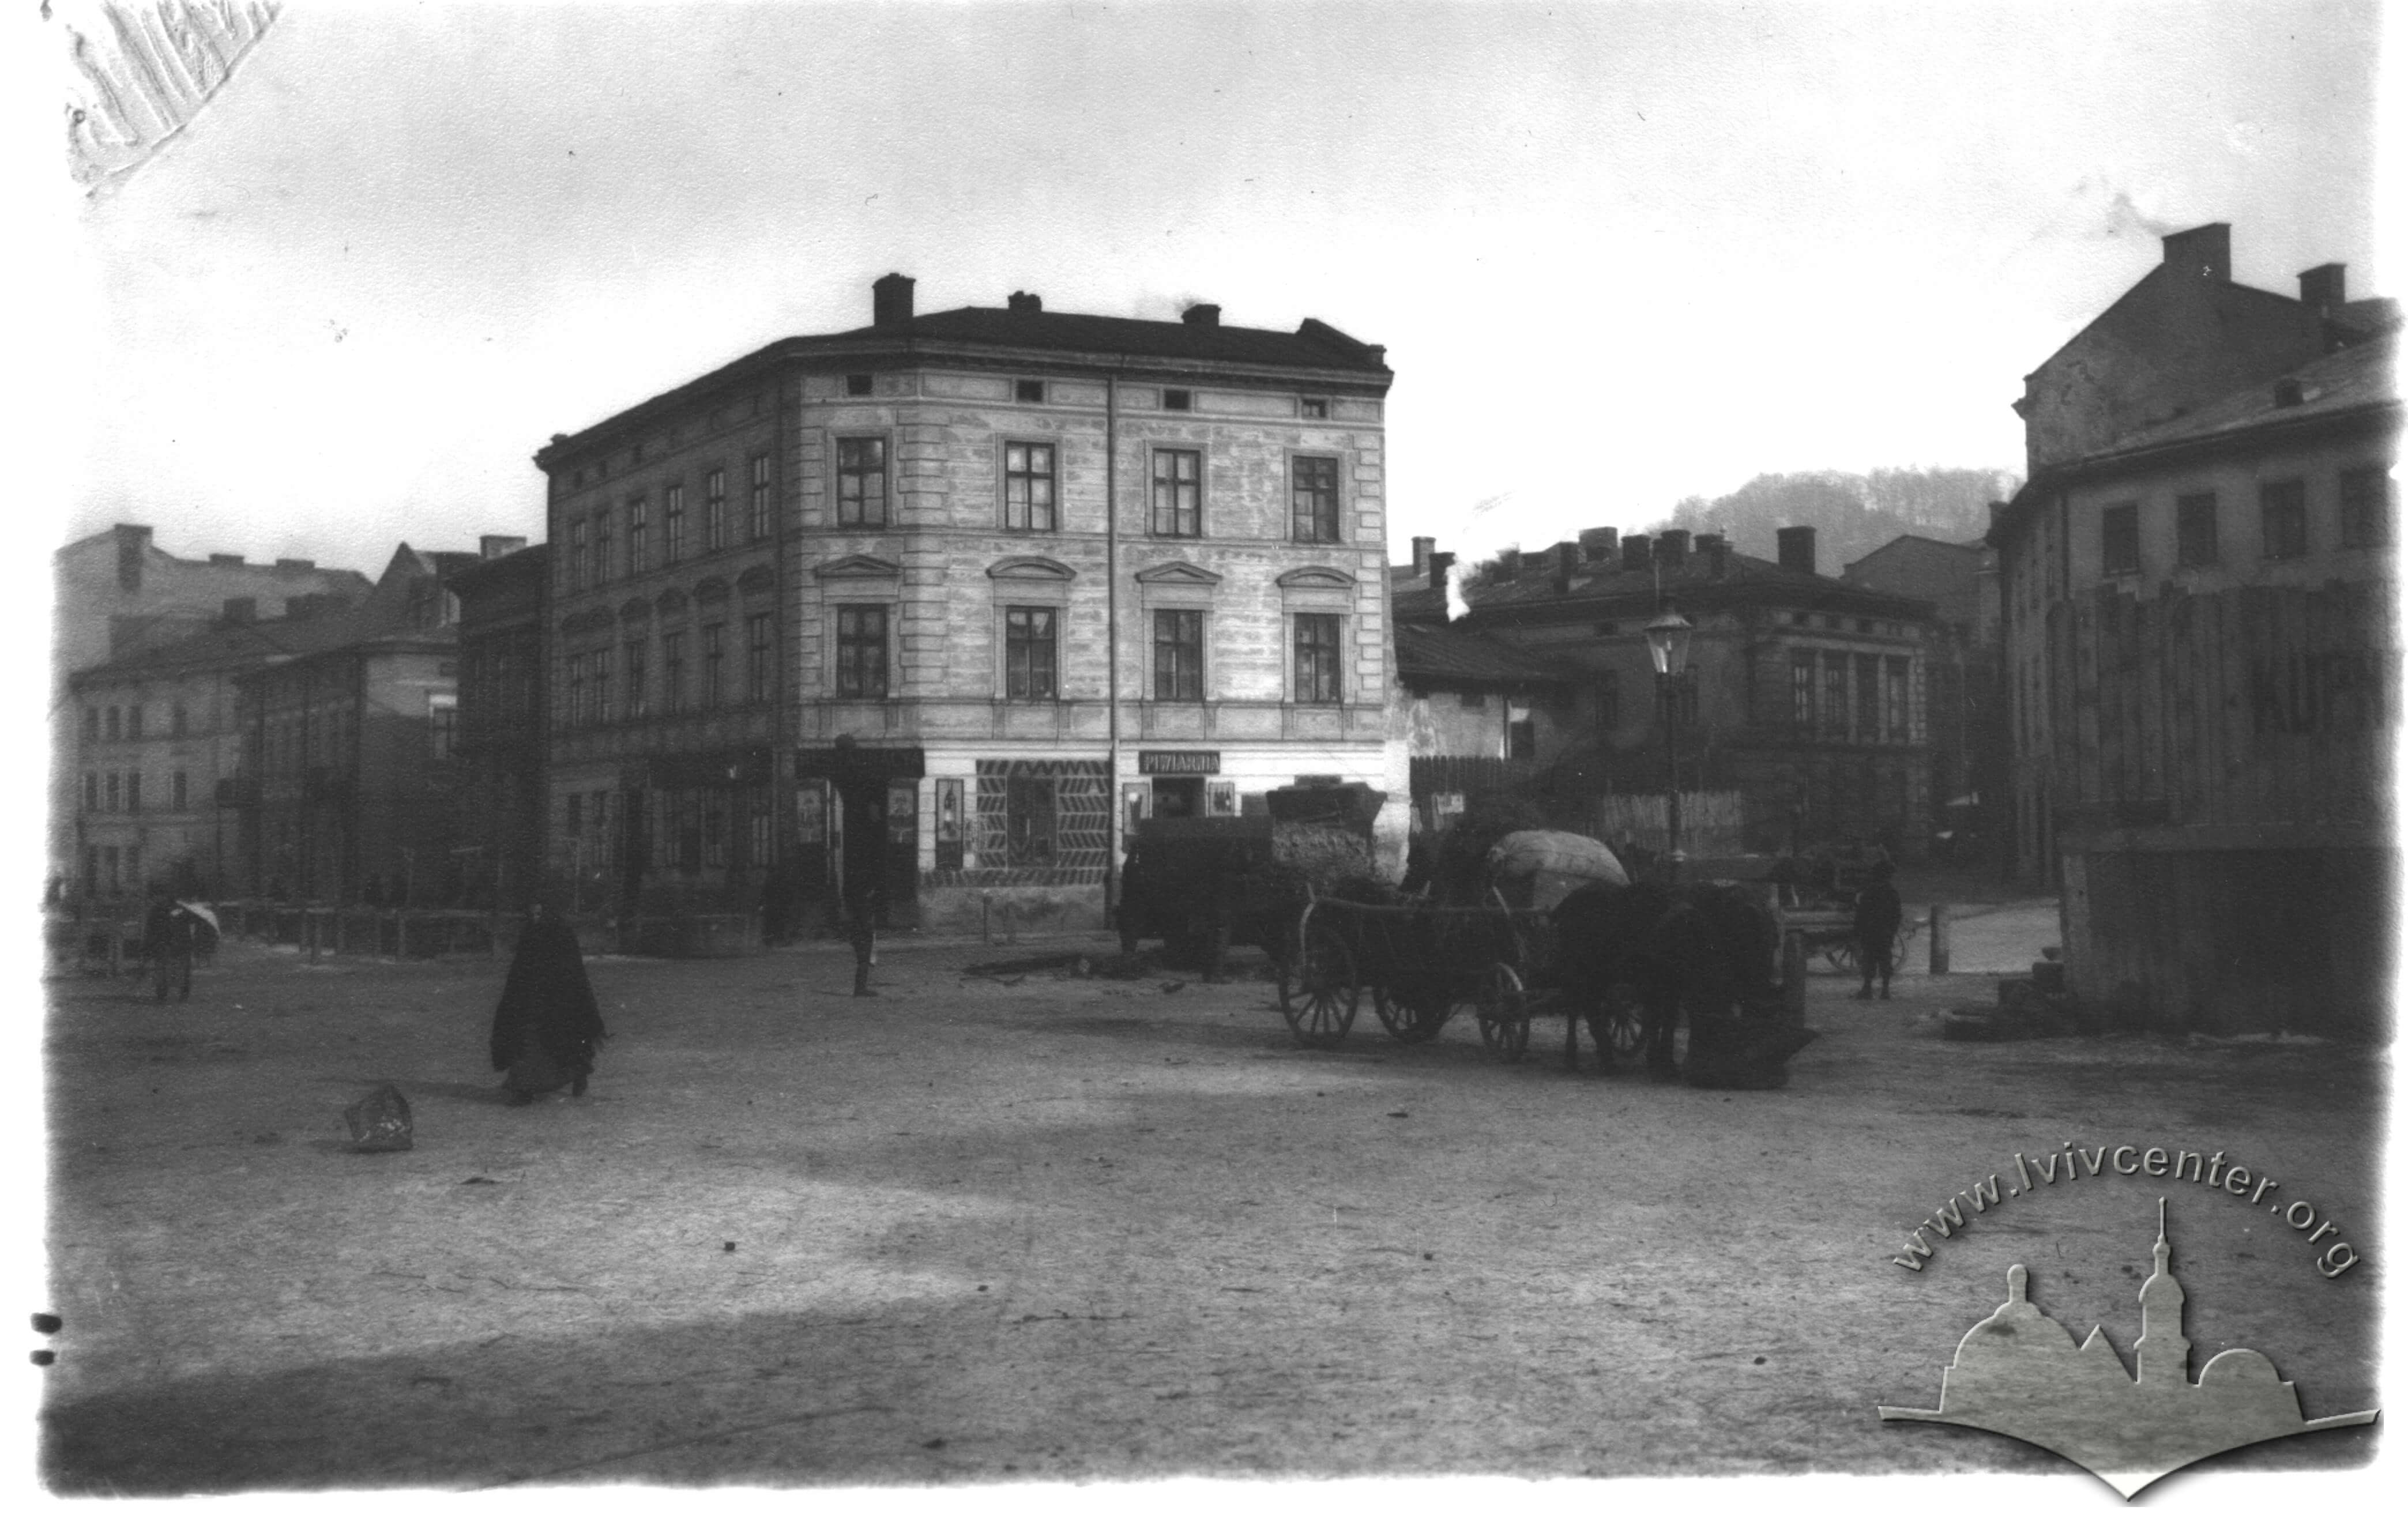 Pl. Rizni (pl. Rzeźni) in 1910-1914. A view towards ul. Łamana (inexistent today) which connected pl. Rzeźni and ul. Łazienna (now vul. Lazneva)/From the collection of Yuriy Karmazin